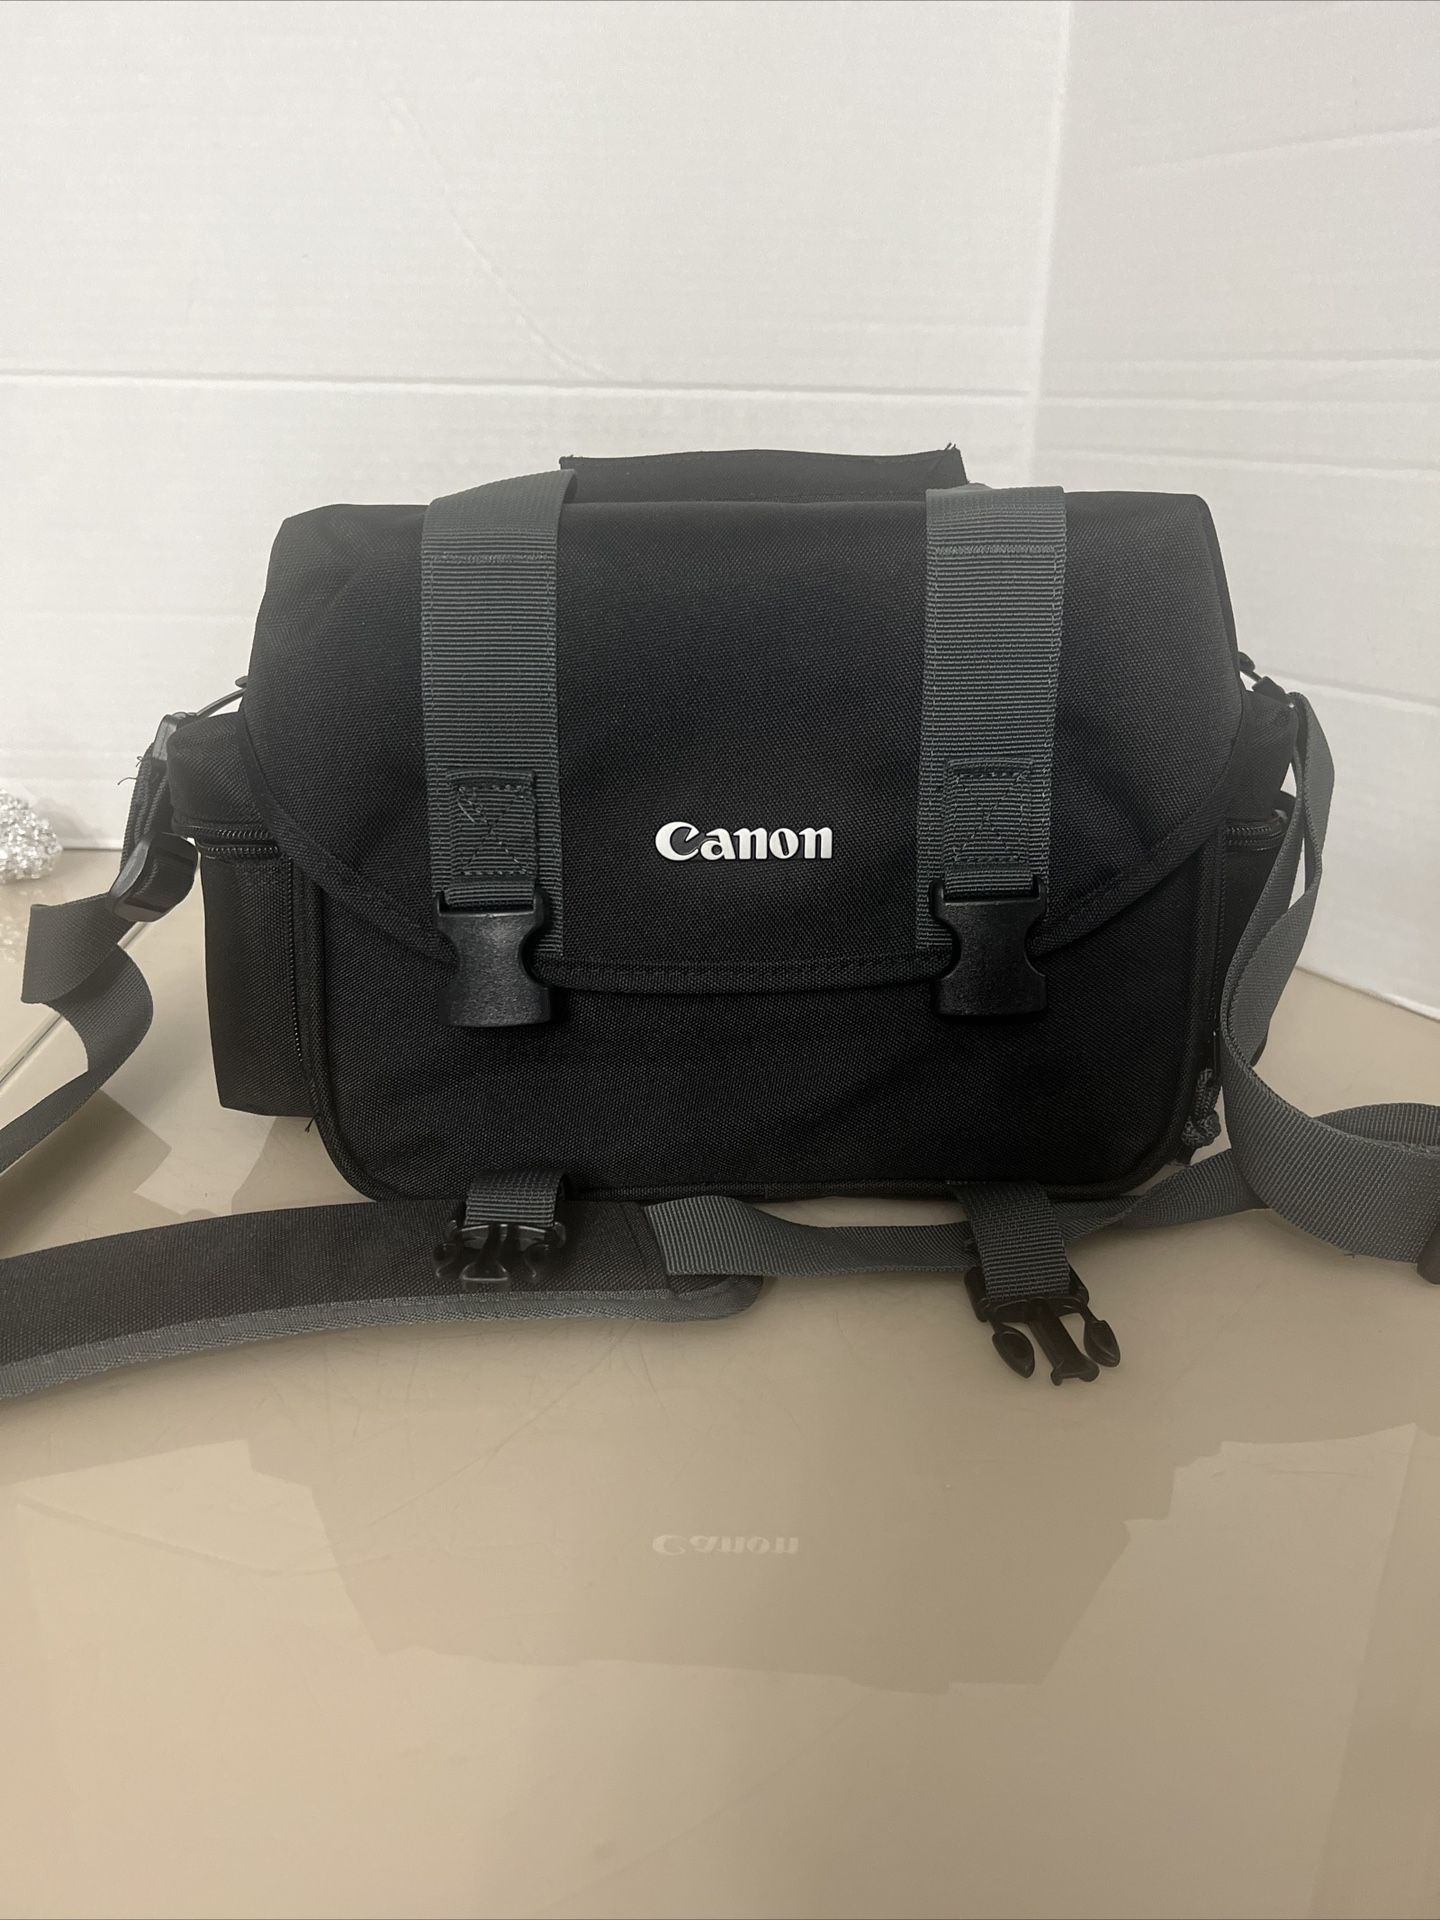 Canon 300DG Black Digital Gadget Bag For all EOS and Rebel Cameras. Pre owned in excellent condition and comes with a strap and the dividers.  